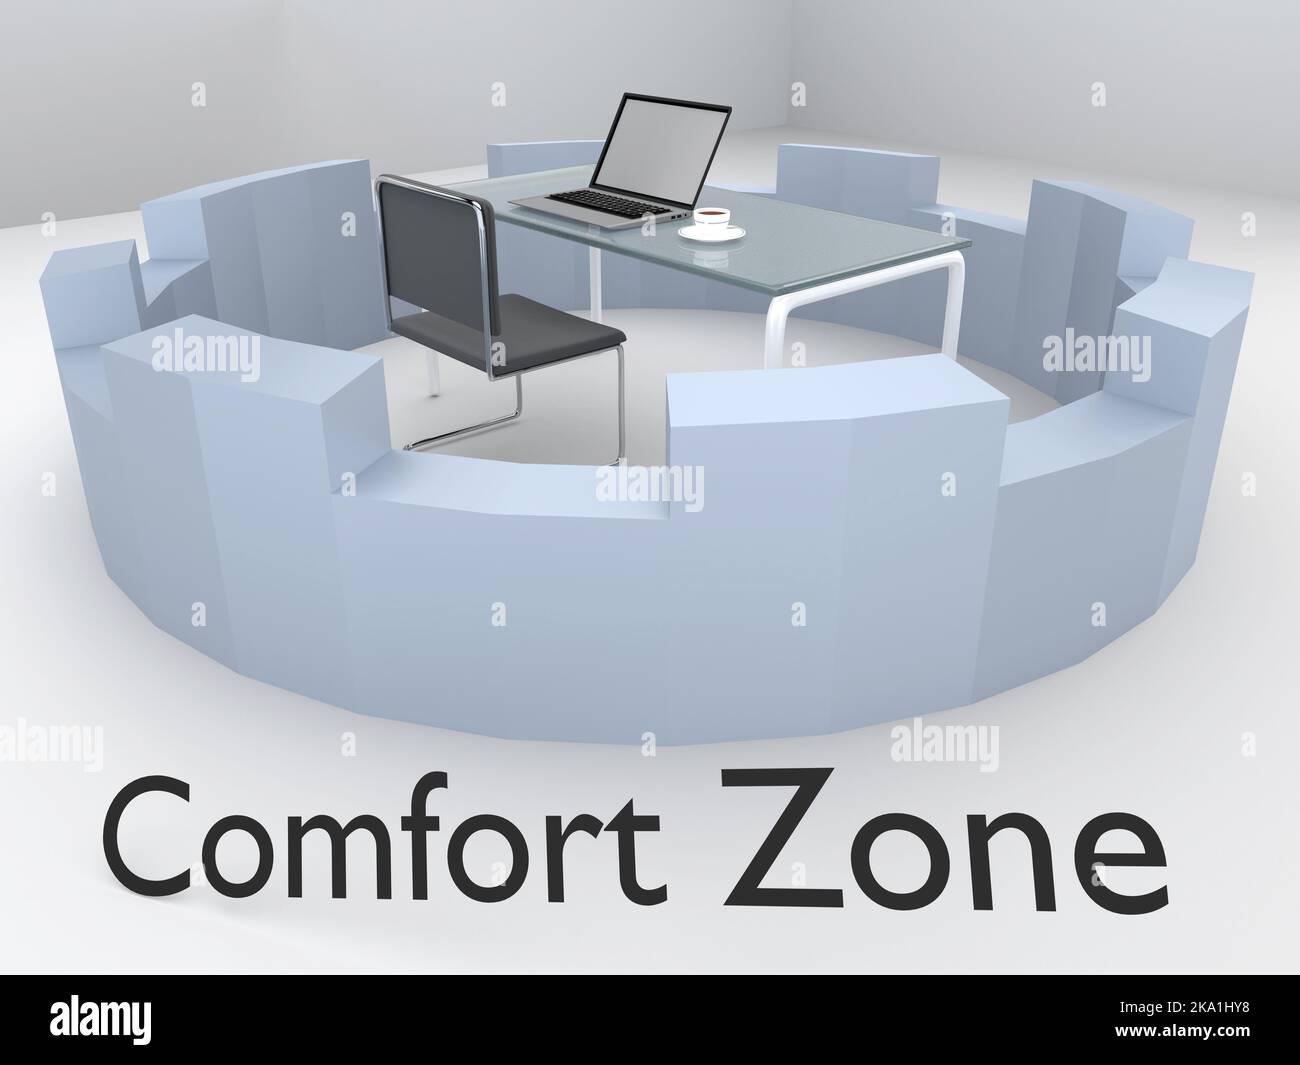 3D illustration of a laptop placed on a desk in a living room, with the script Comfort Zone. Stock Photo